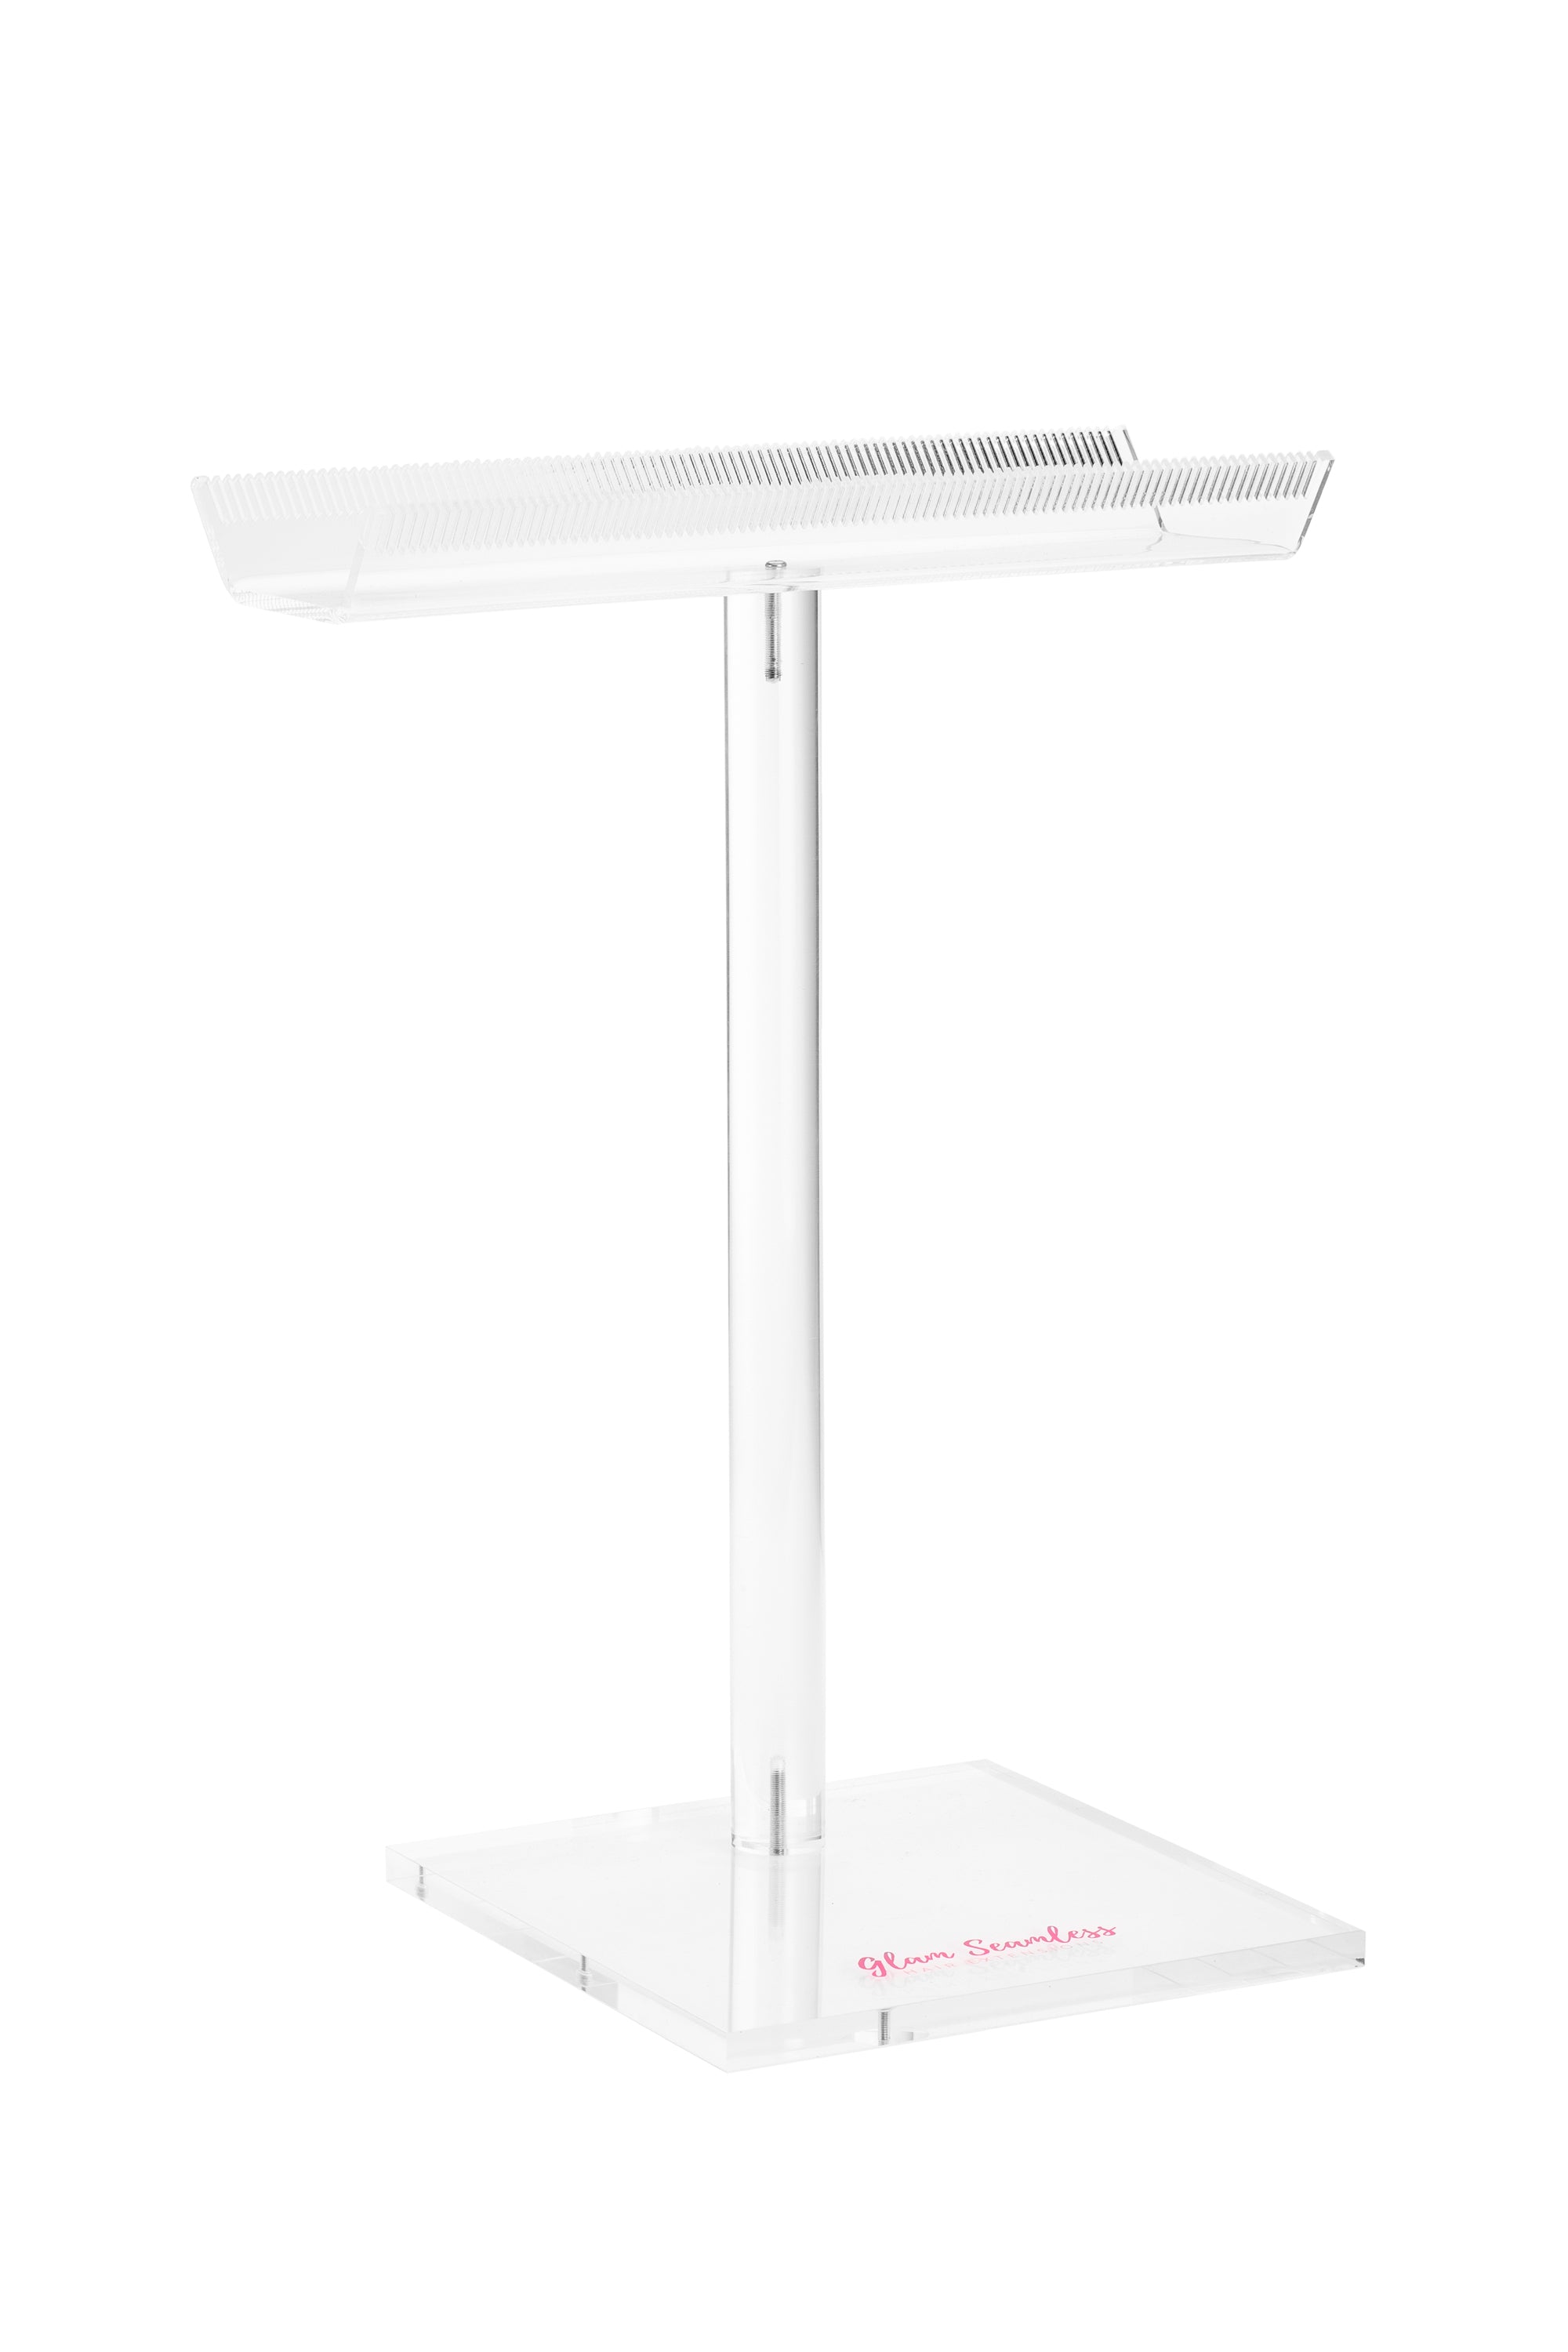 Glam Seamless Acrylic Hair Extension Organizer Stand - Glam